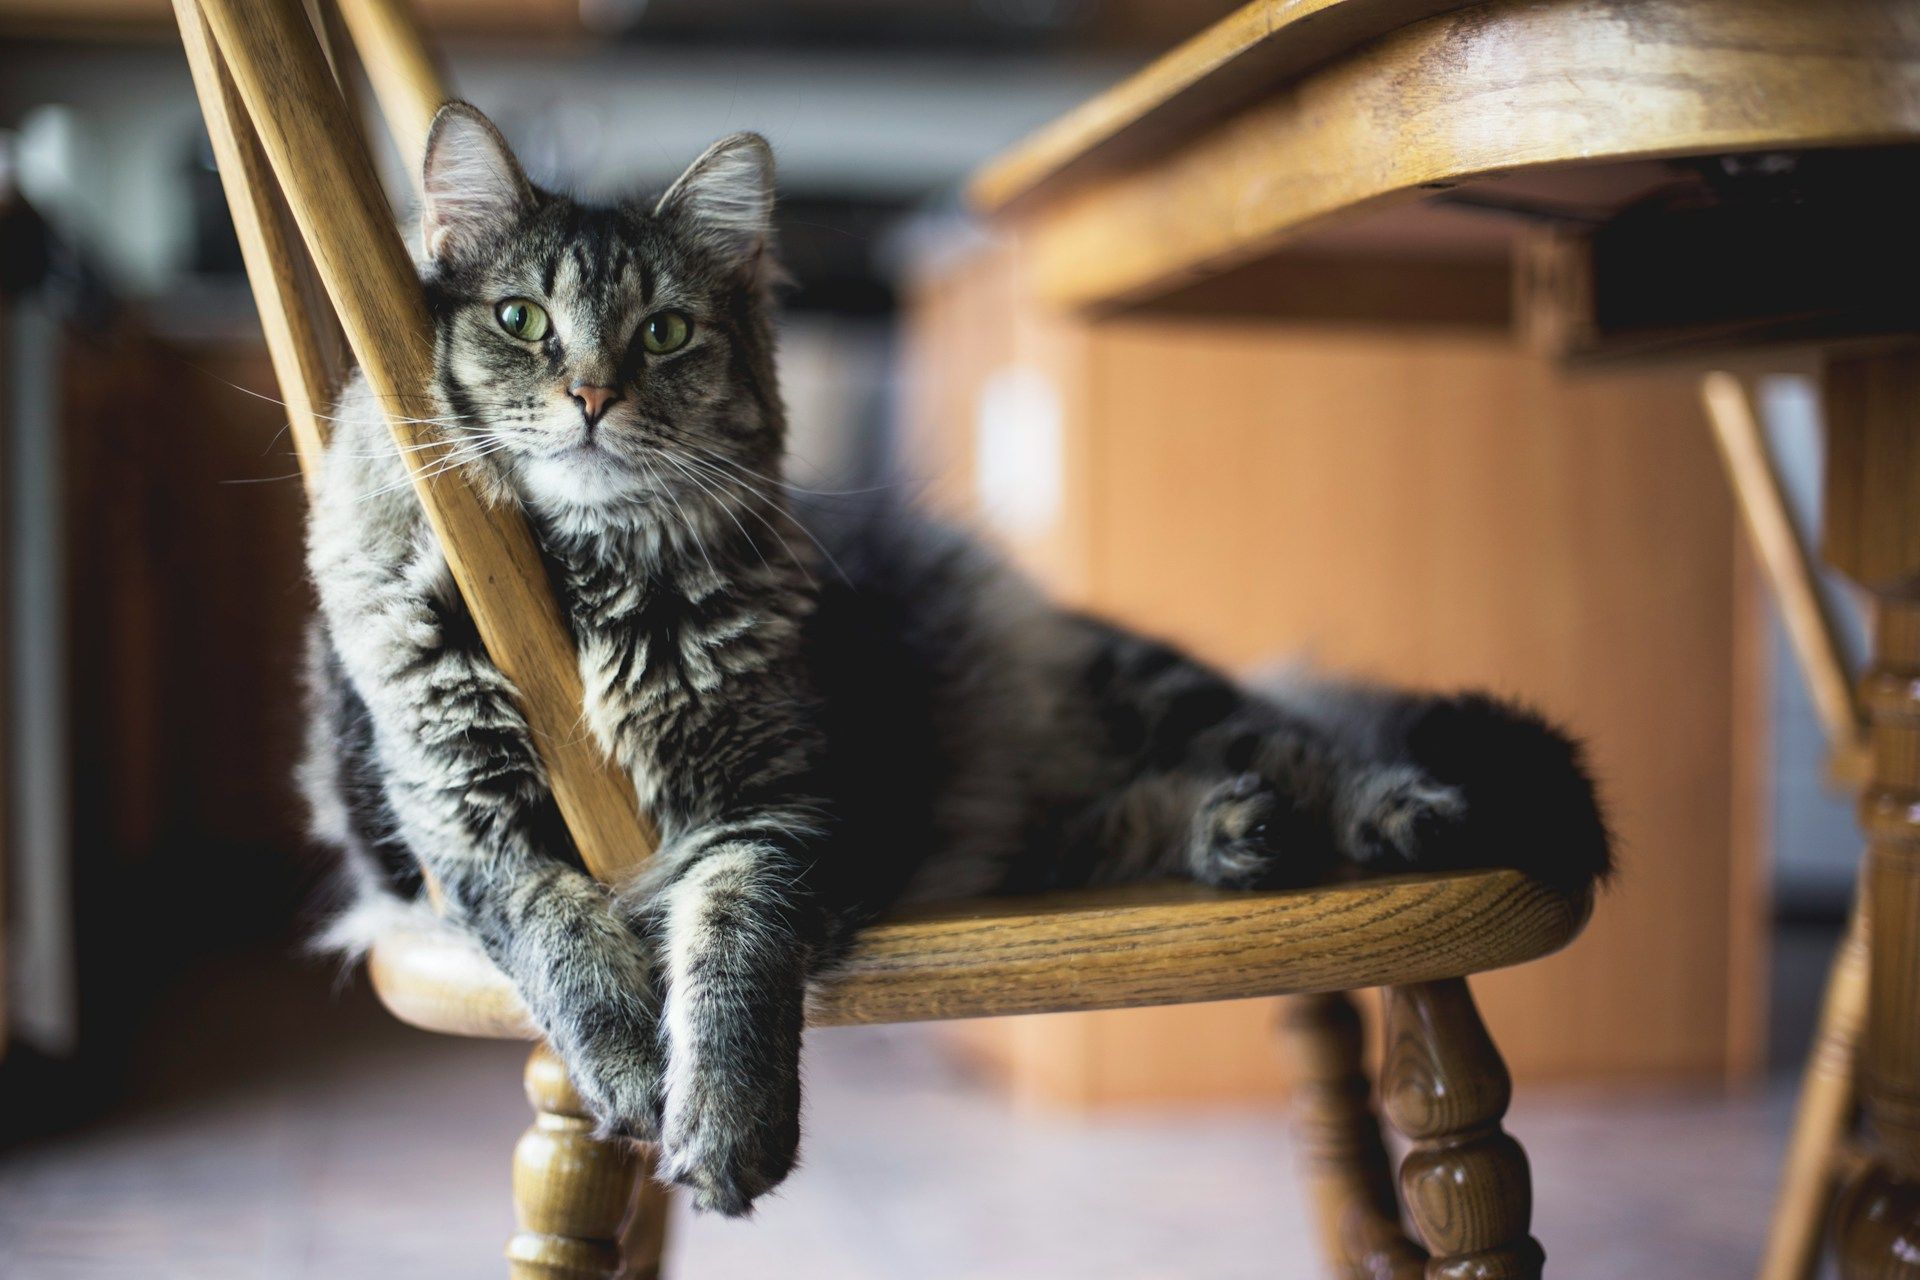 A grey cat leaning on a wooden chair